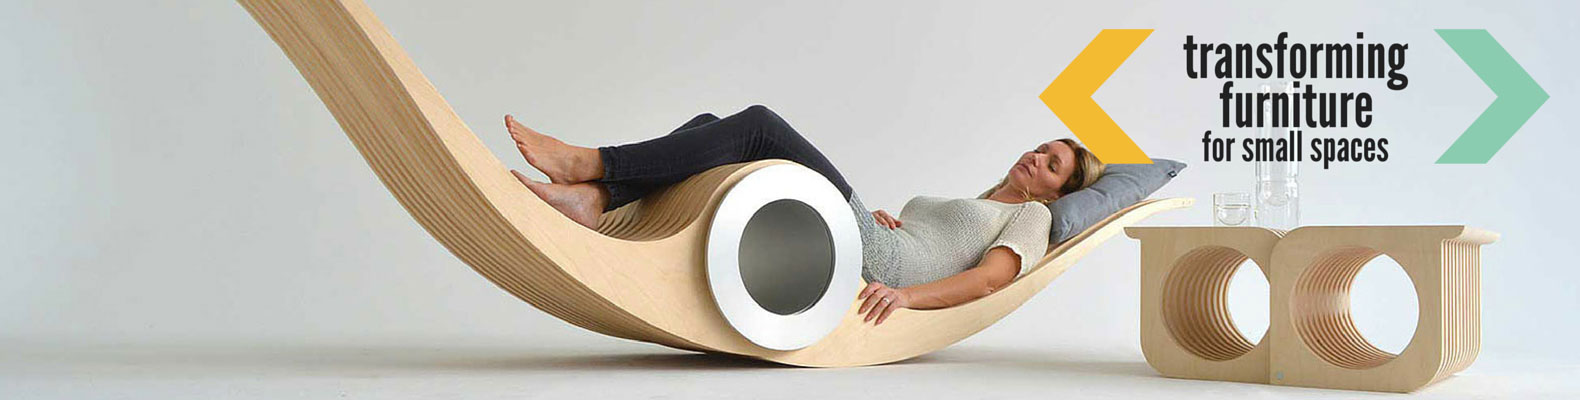 11 pieces of transforming furniture that would work wonders for a .